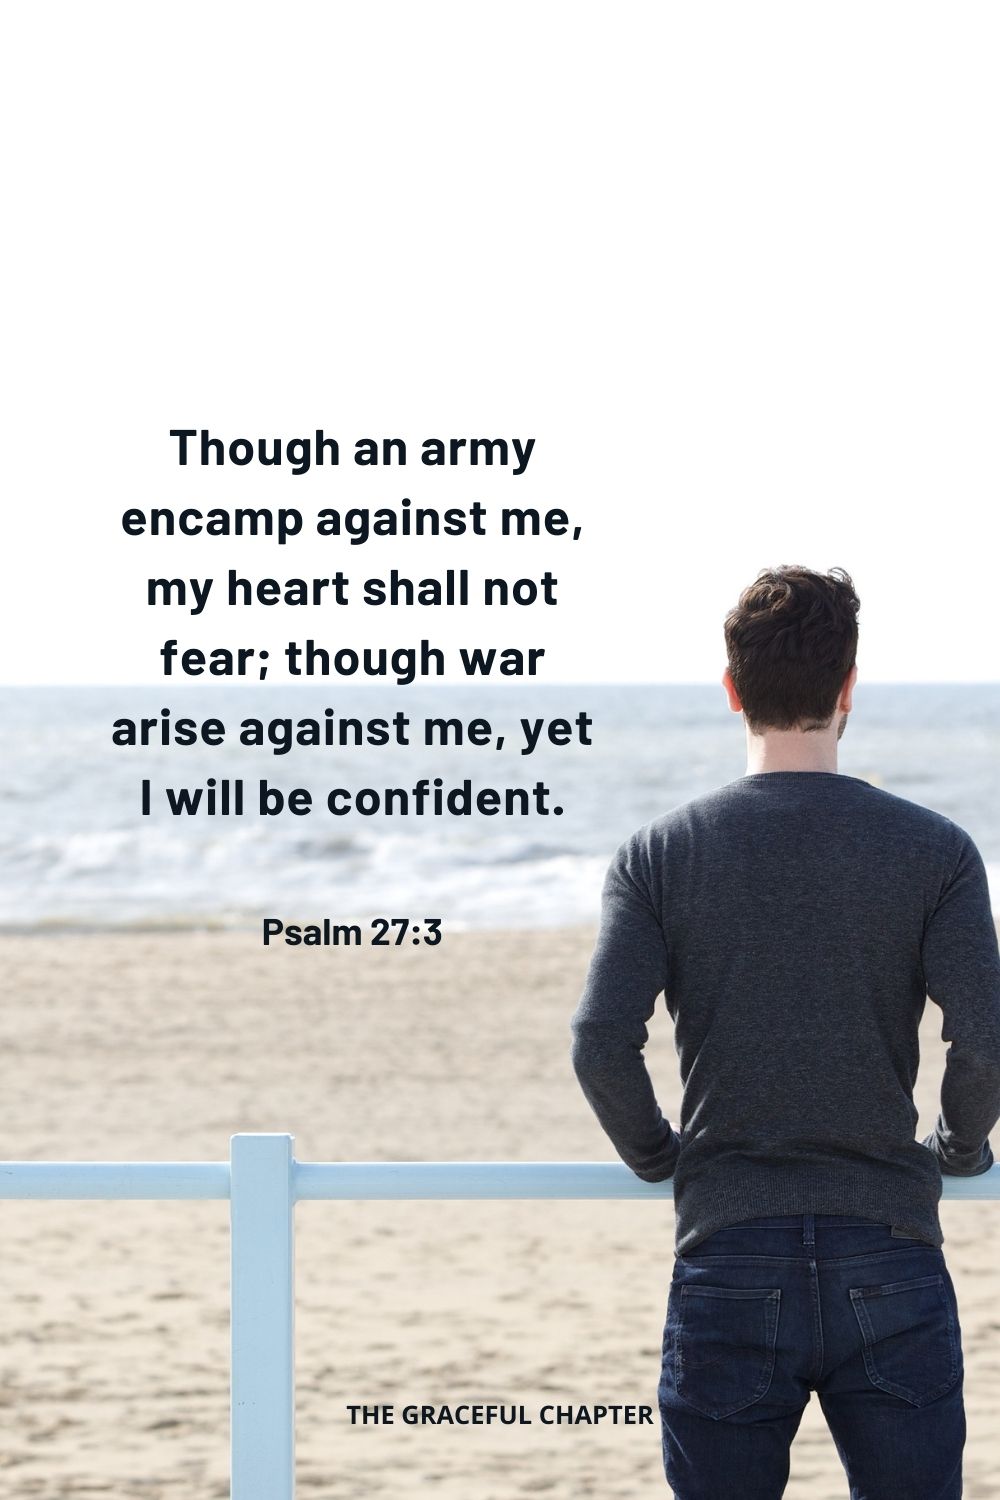 Though an army encamp against me, my heart shall not fear; though war arise against me, yet I will be confident. Psalm 27:3